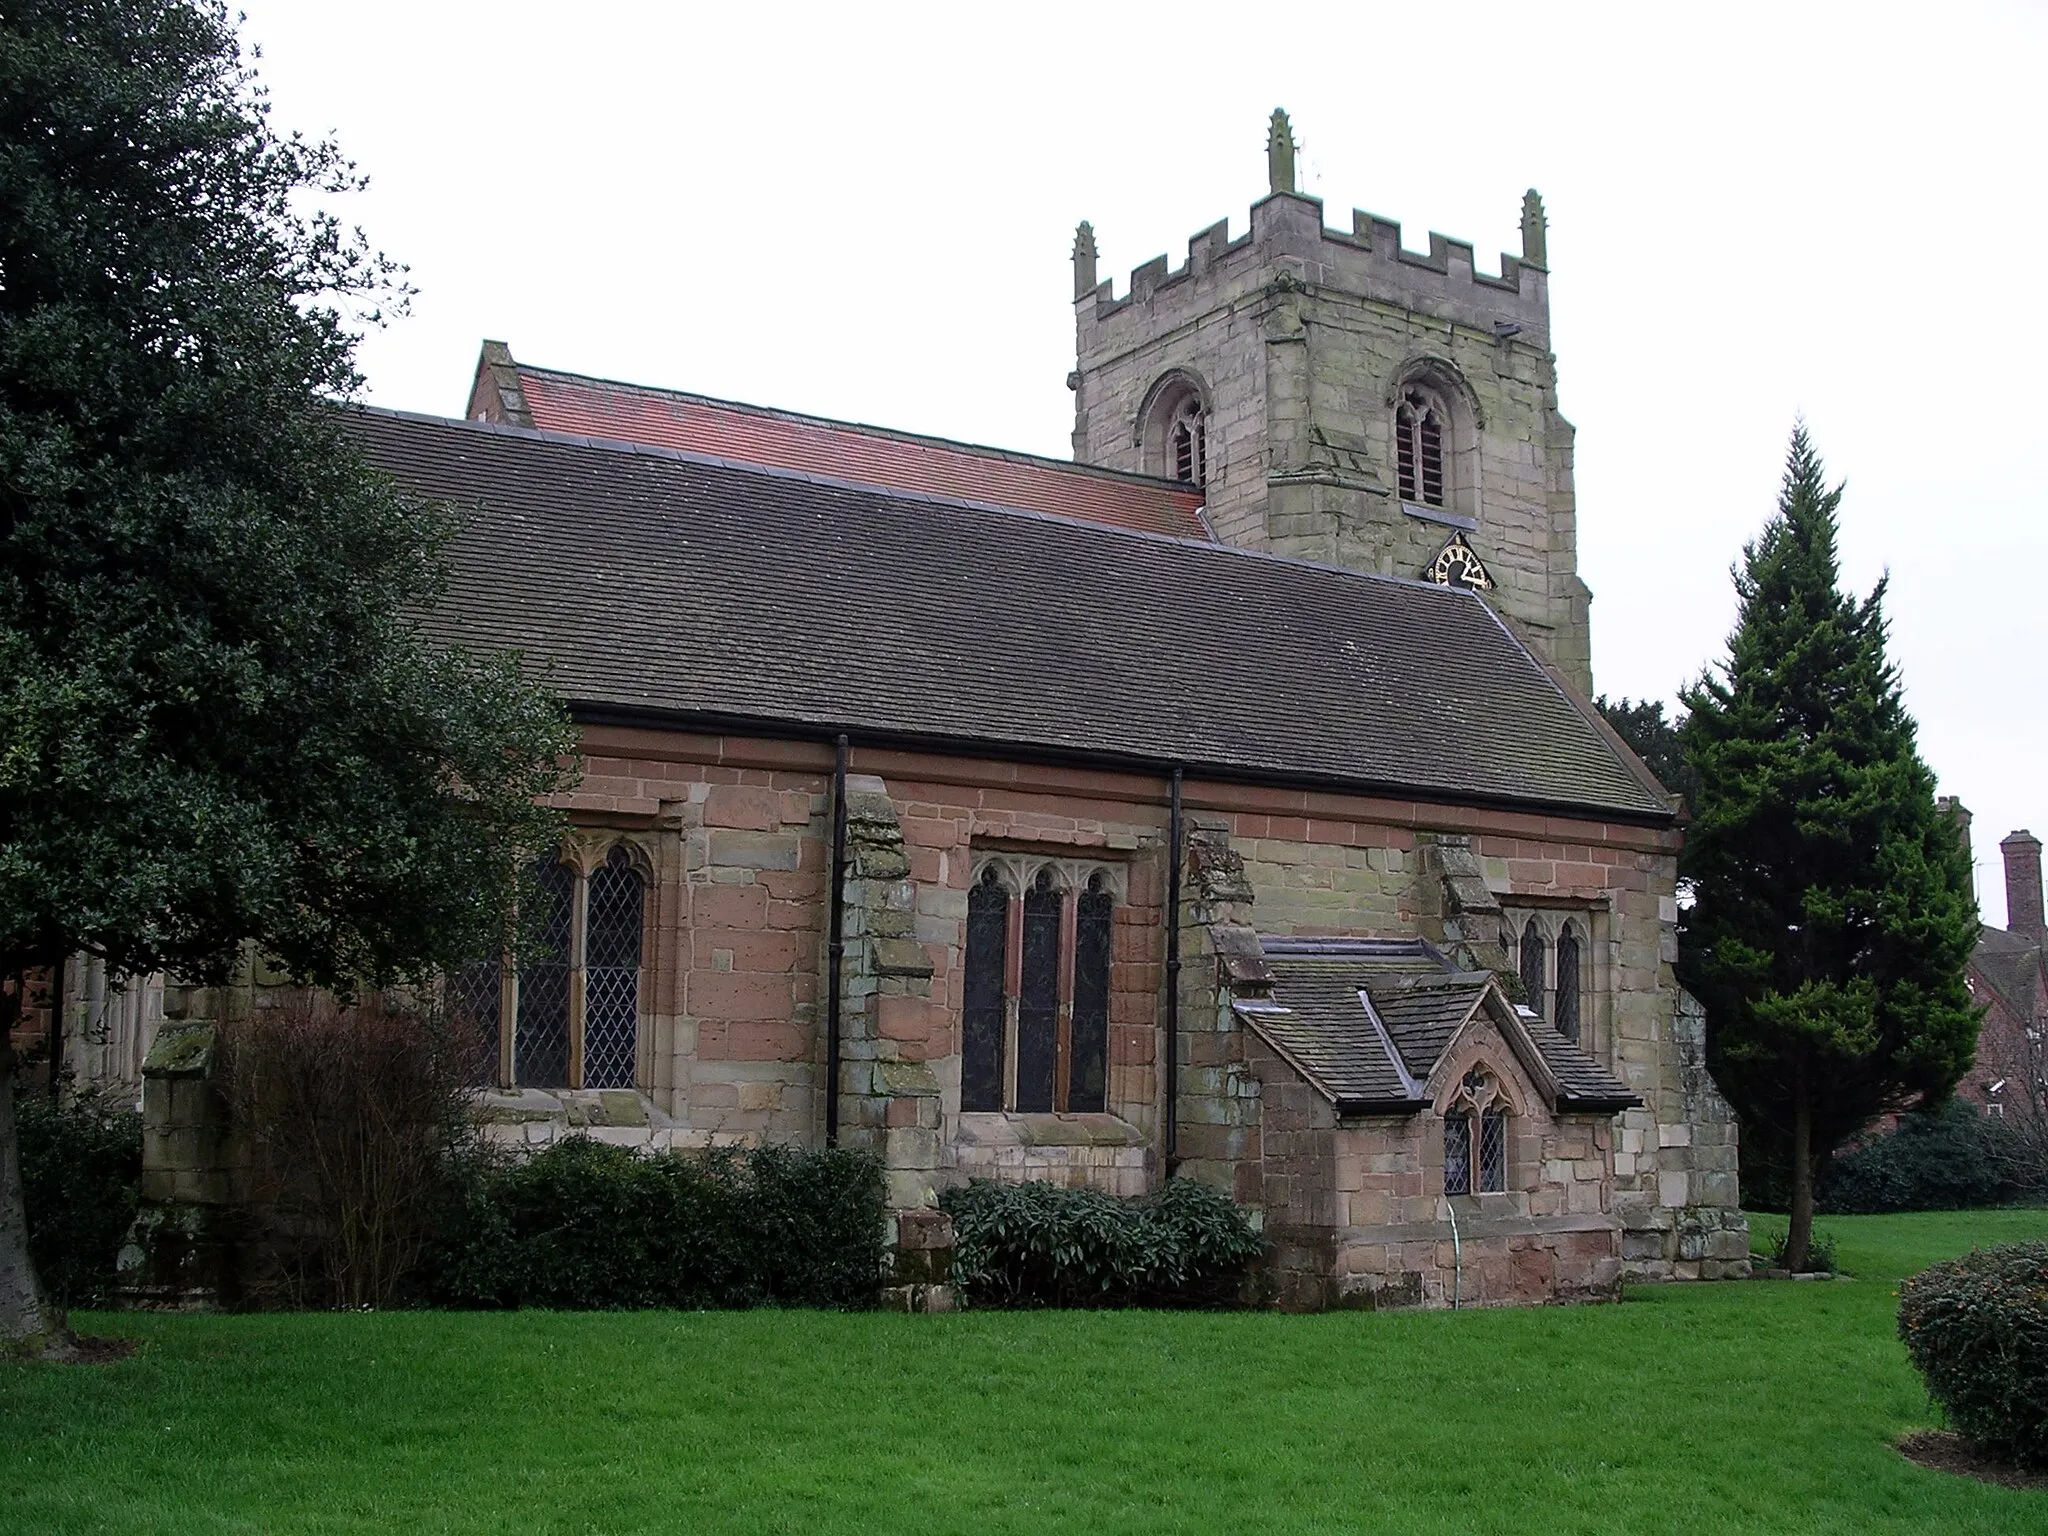 Photo showing: Photograph taken on 1 Feb 2007 by me of St Mary's Church (side view), Walsgrave, Coventry, England.